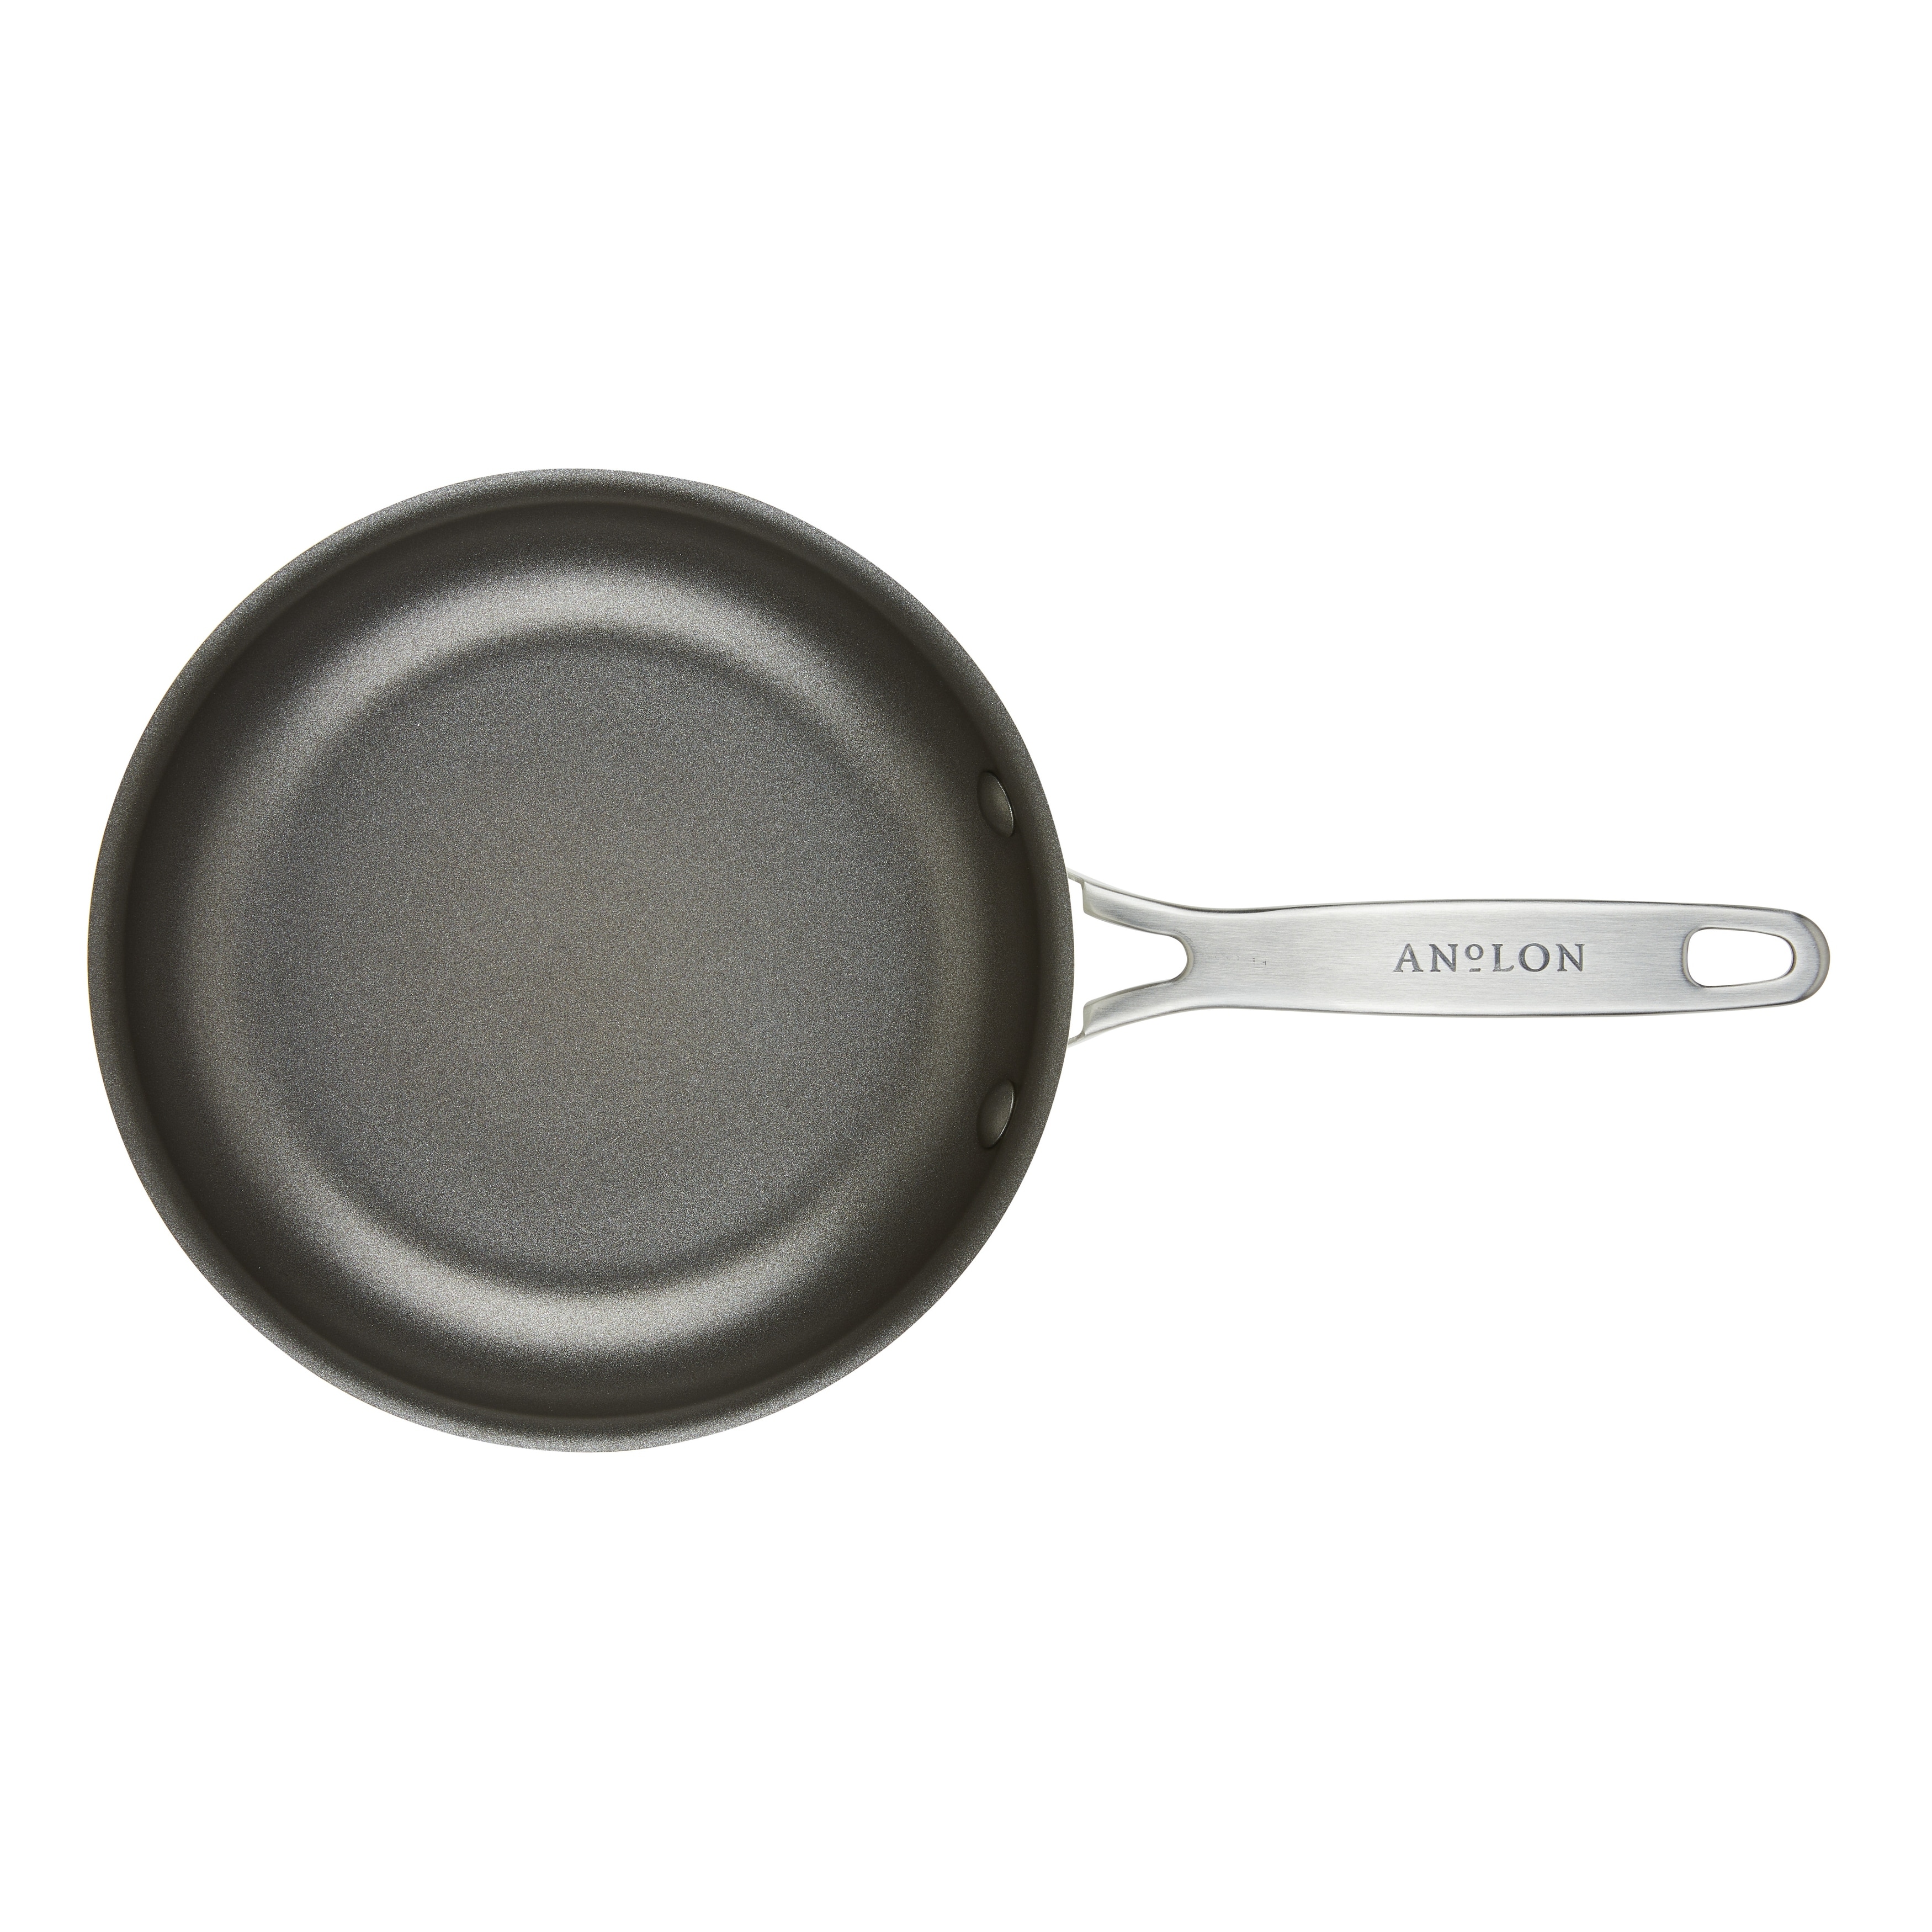 https://ak1.ostkcdn.com/images/products/is/images/direct/403b2c6ef83725faf852d24e03c795436aecbd0d/Anolon-Achieve-Hard-Anodized-Nonstick-Frying-Pan%2C-12-Inch.jpg